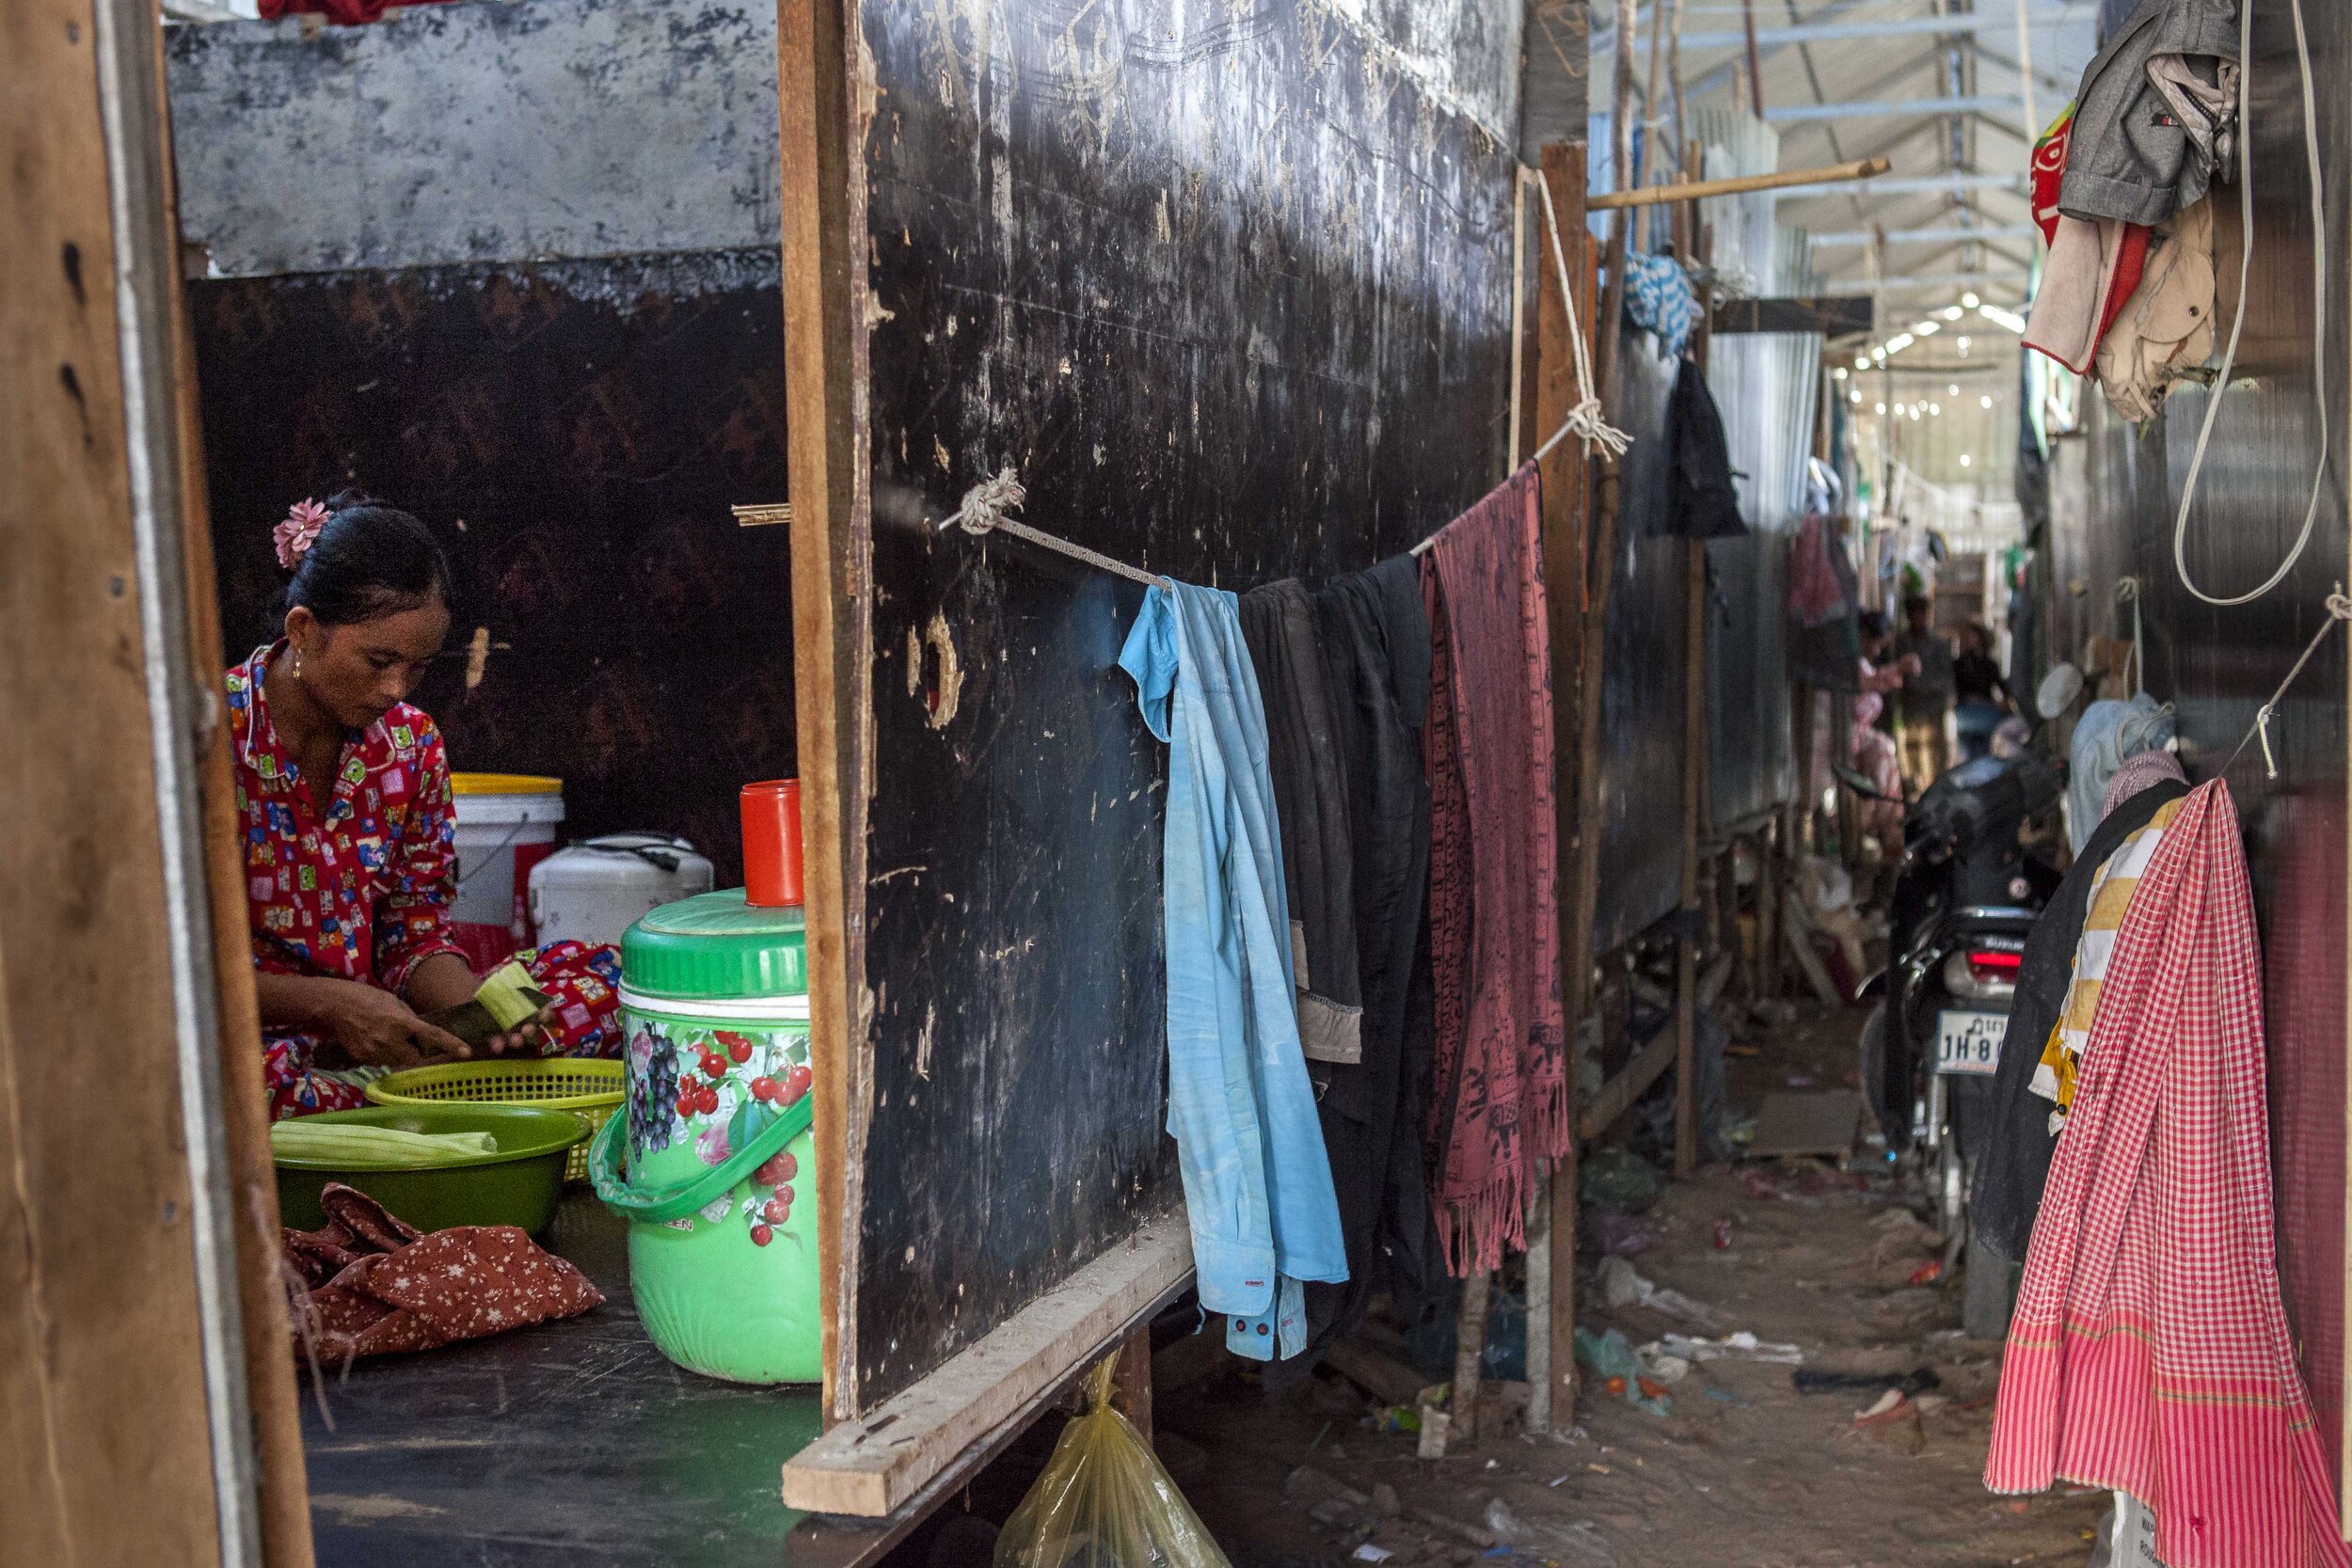  A woman prepares food in her home; a single room inside a shed provided by the construction company on the build site of the 'Phnom Penh City Centre' development. 